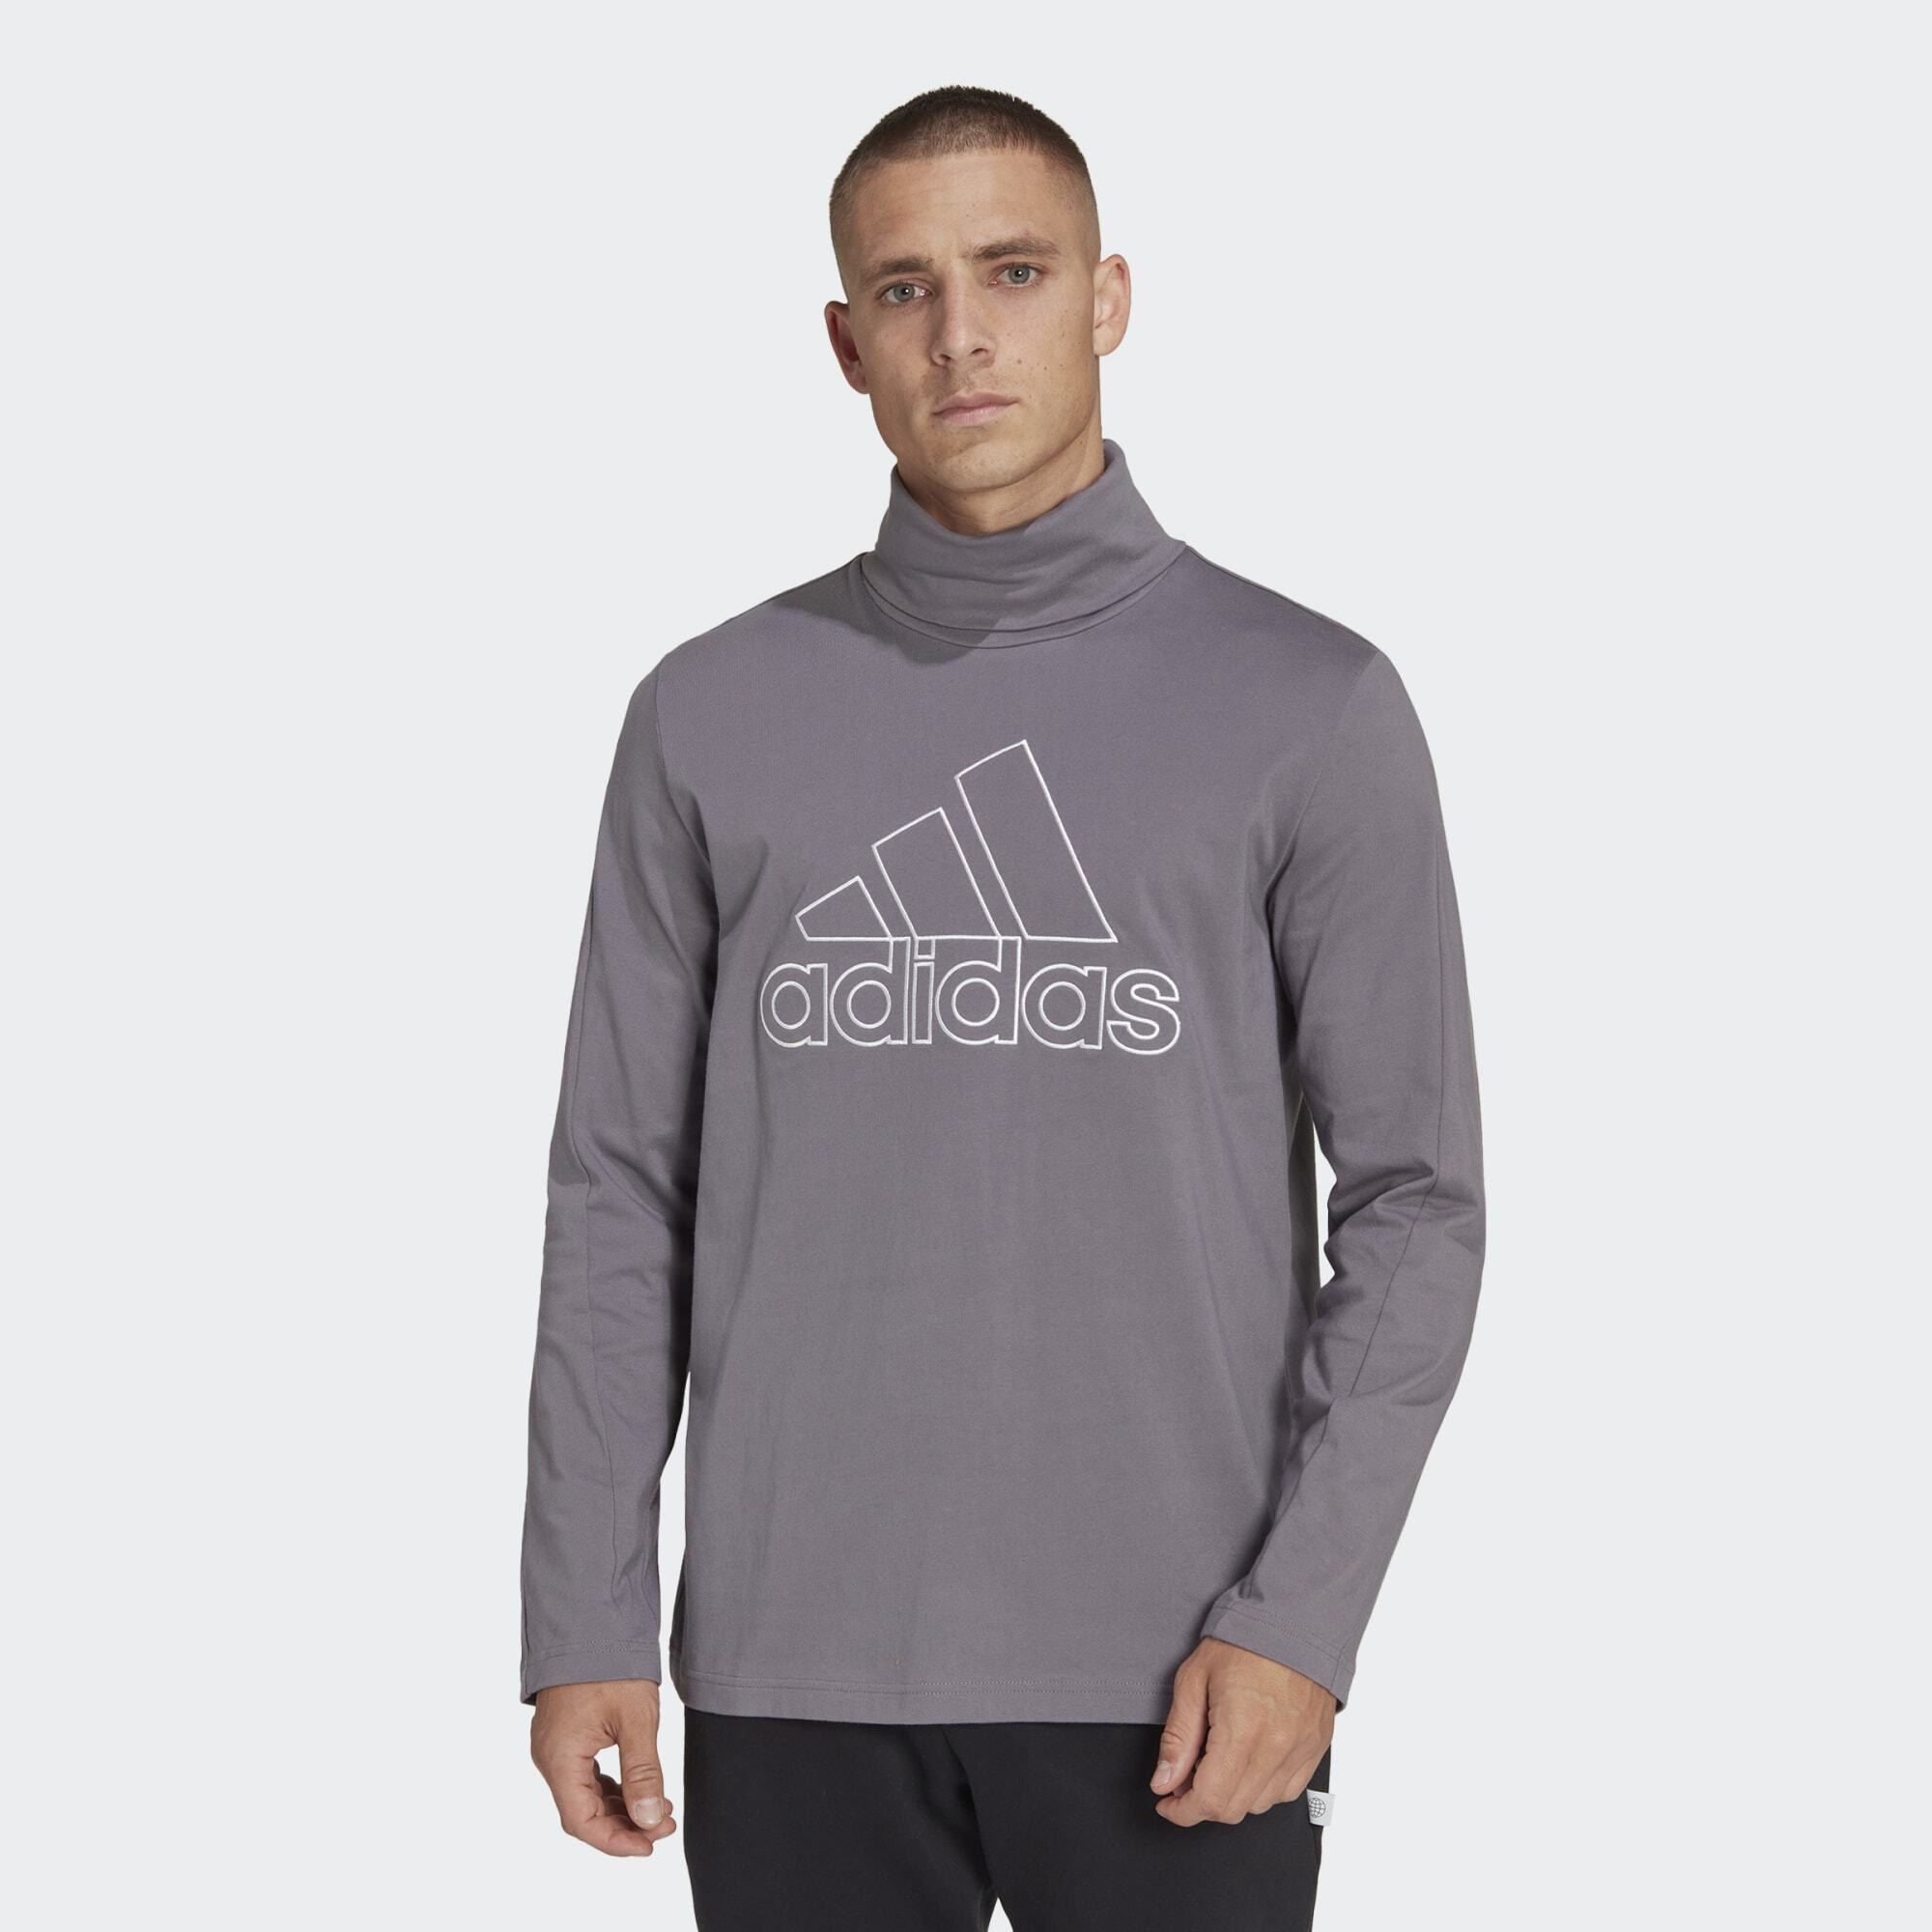 adidas Future Icons Embroidered Badge of Sport Long Sleev (9000127189_1730) 90001271891730